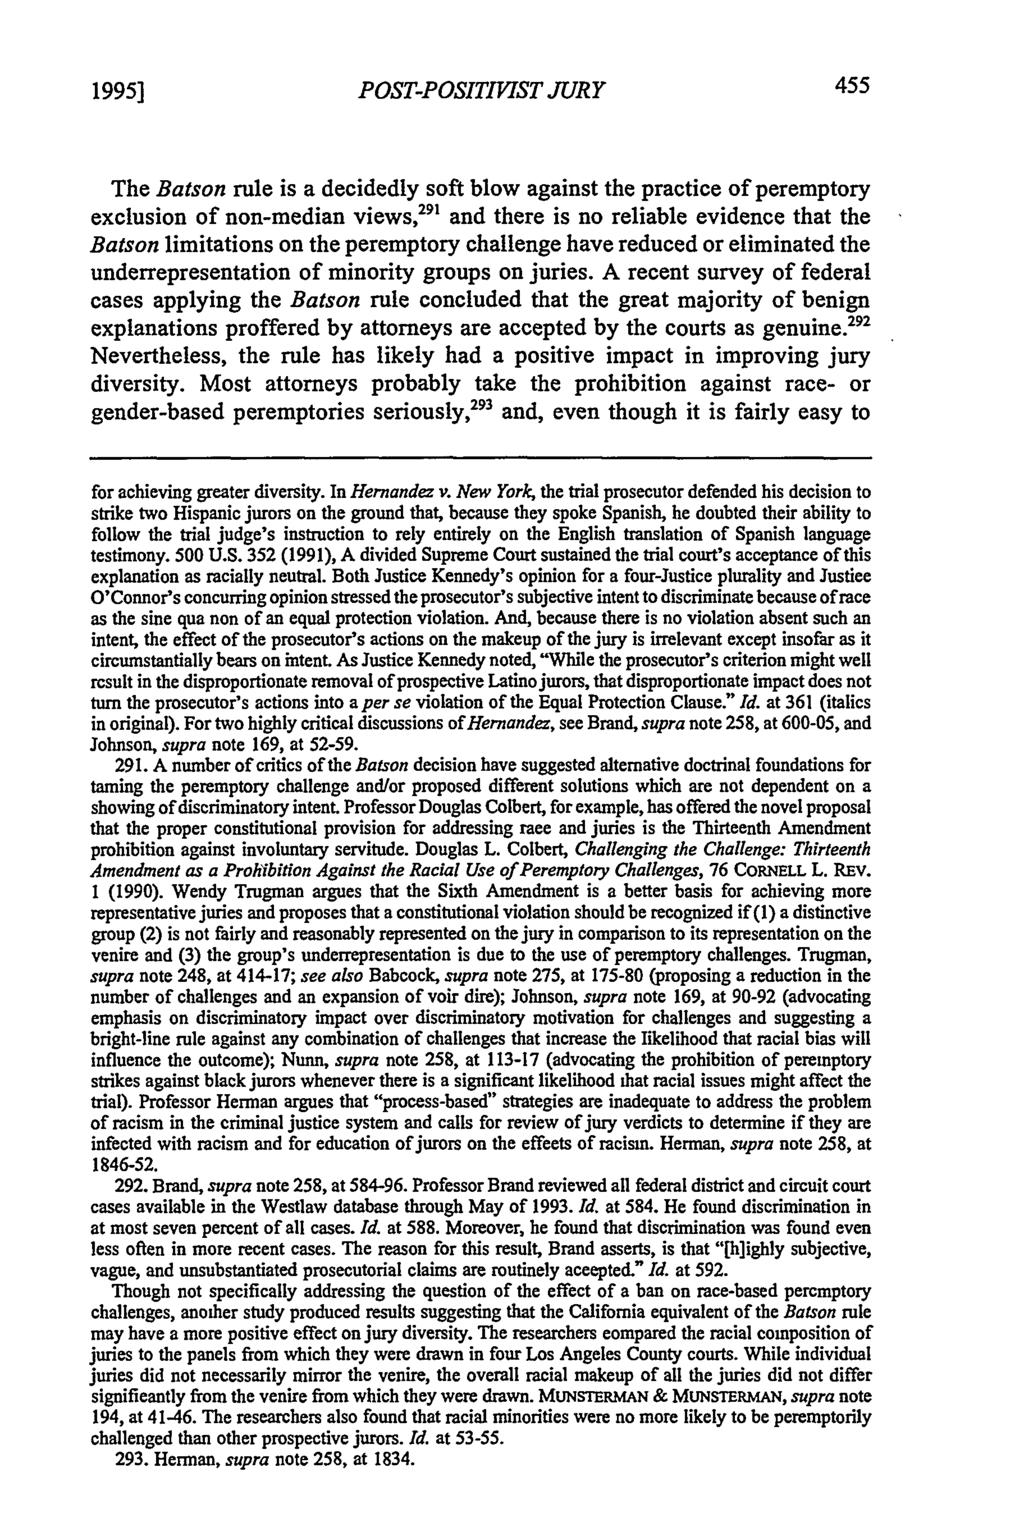 1995] POST-POSITIVIST JURY The Batson rule is a decidedly soft blow against the practice of peremptory exclusion of non-median views,291 and there is no reliable evidence that the Batson limitations